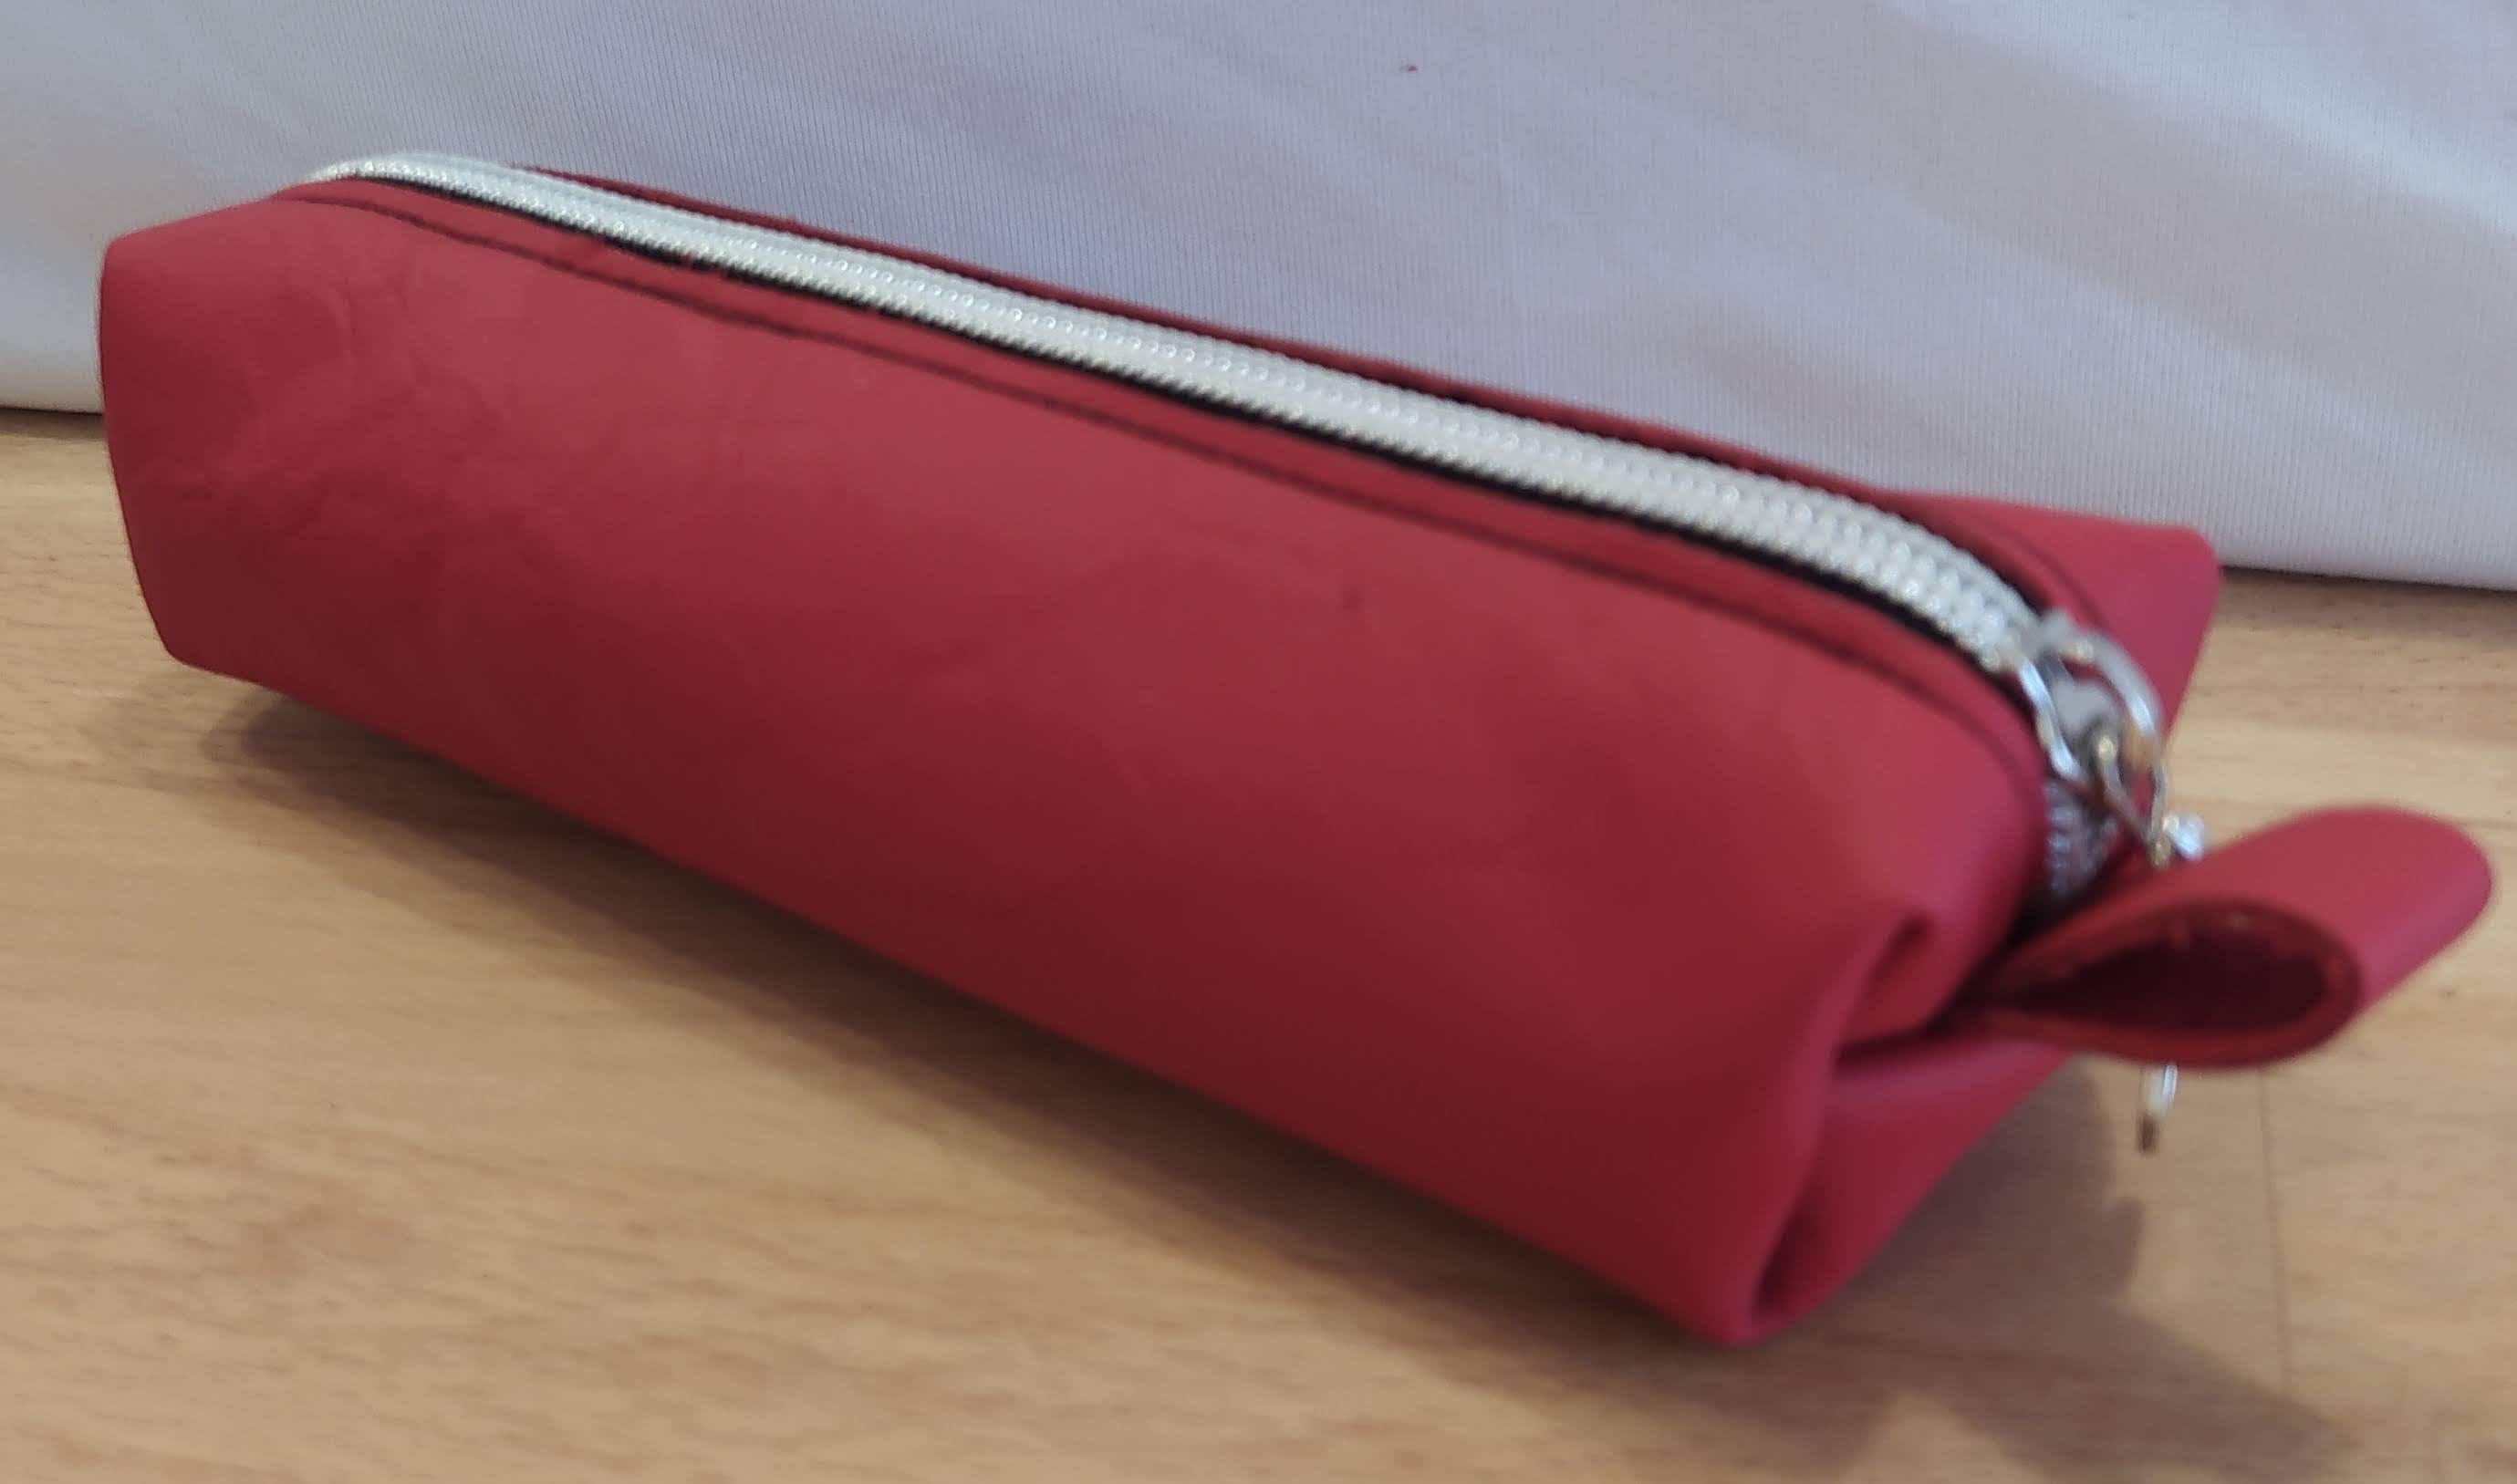 Pen Case, Pencil Case, Pencil Case, Pencil Case, Real Leather, Red, Silver,  Handmade, Small Zip 